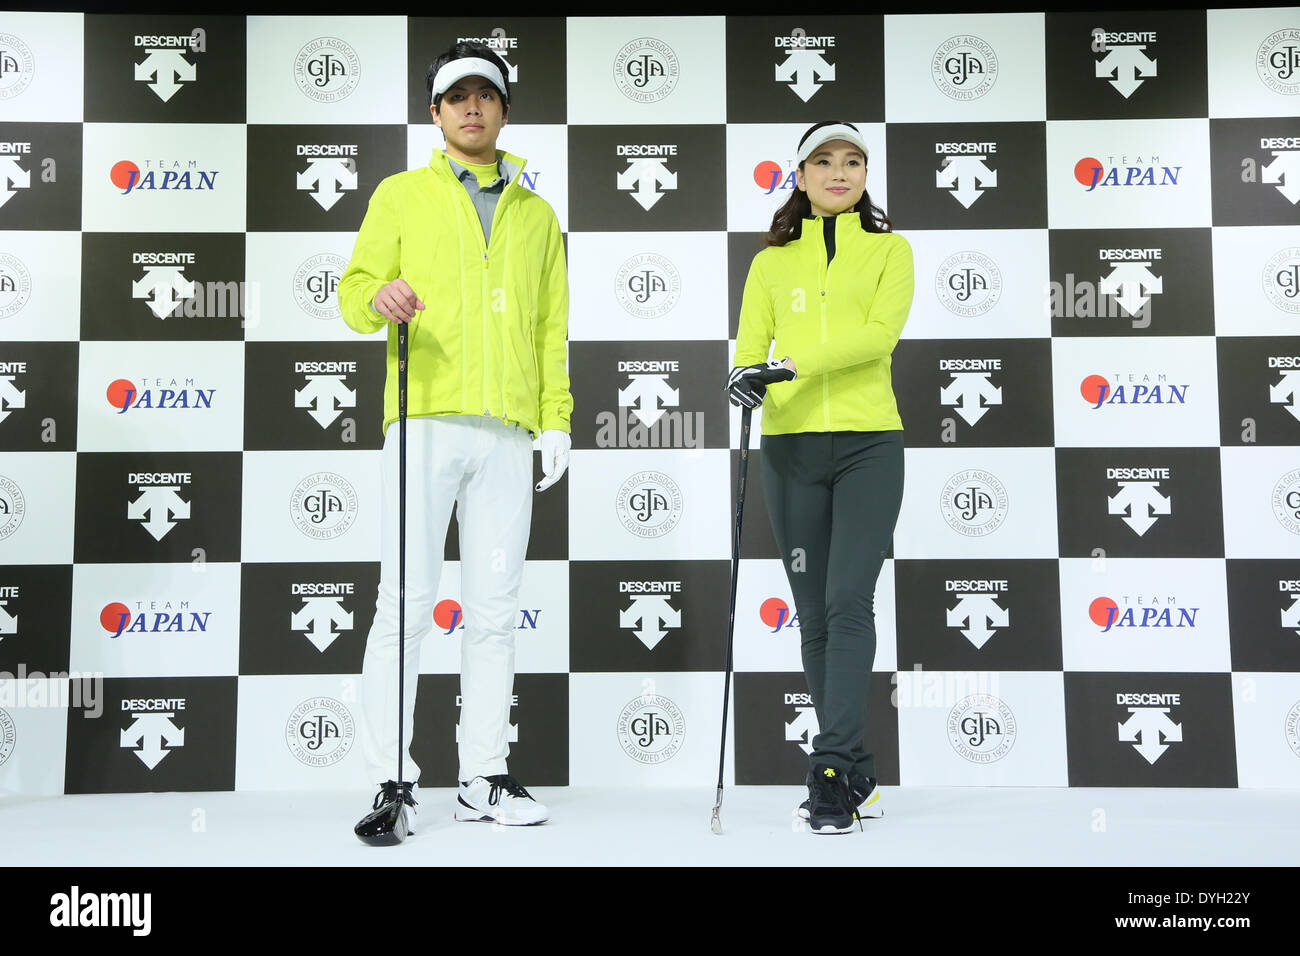 General view, APRIL 17, 2014 : A press conference about Japanese sports brand DESCENTE at Tokyo, Japan. DESCENTE made an official supplier agreement with Japan Golf Association (JGA) and started their new brand 'DESCENTE GOLF'. Credit:  Yohei Osada/AFLO SPORT/Alamy Live News Stock Photo